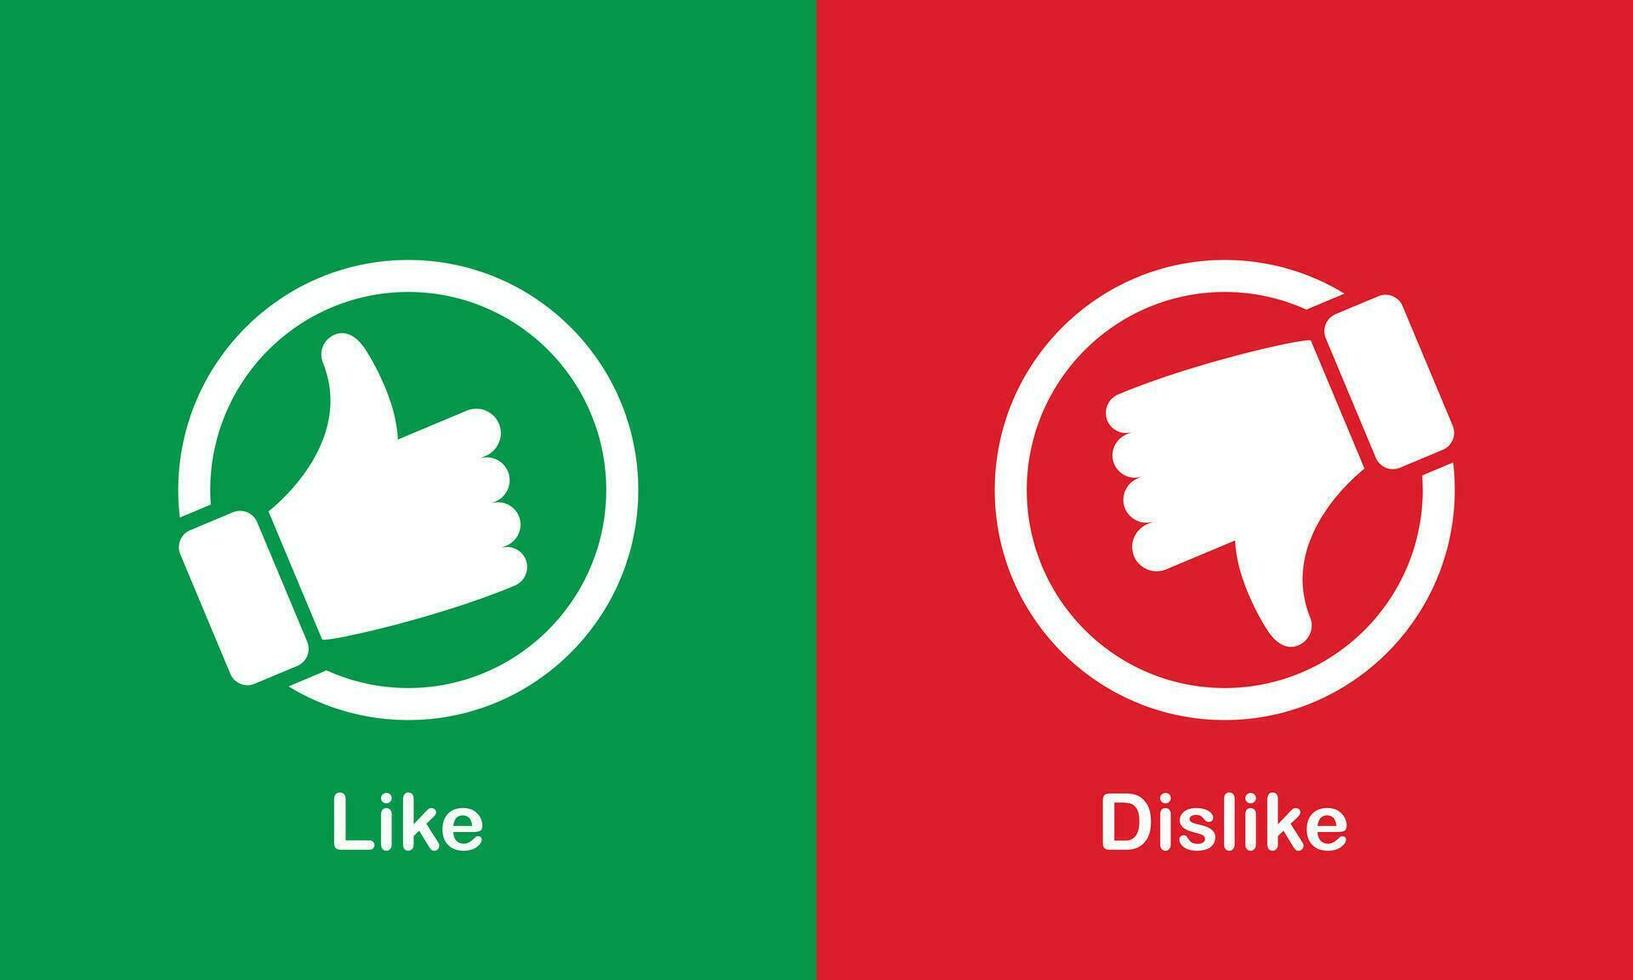 Like and Dislike Pictogram Collection. Thumb Up, Thumb Down Silhouette Icon Set. Good and Bad Button. Social Media Feedback Symbols, Best Choice Red and Green Sign. Isolated Vector Illustration.